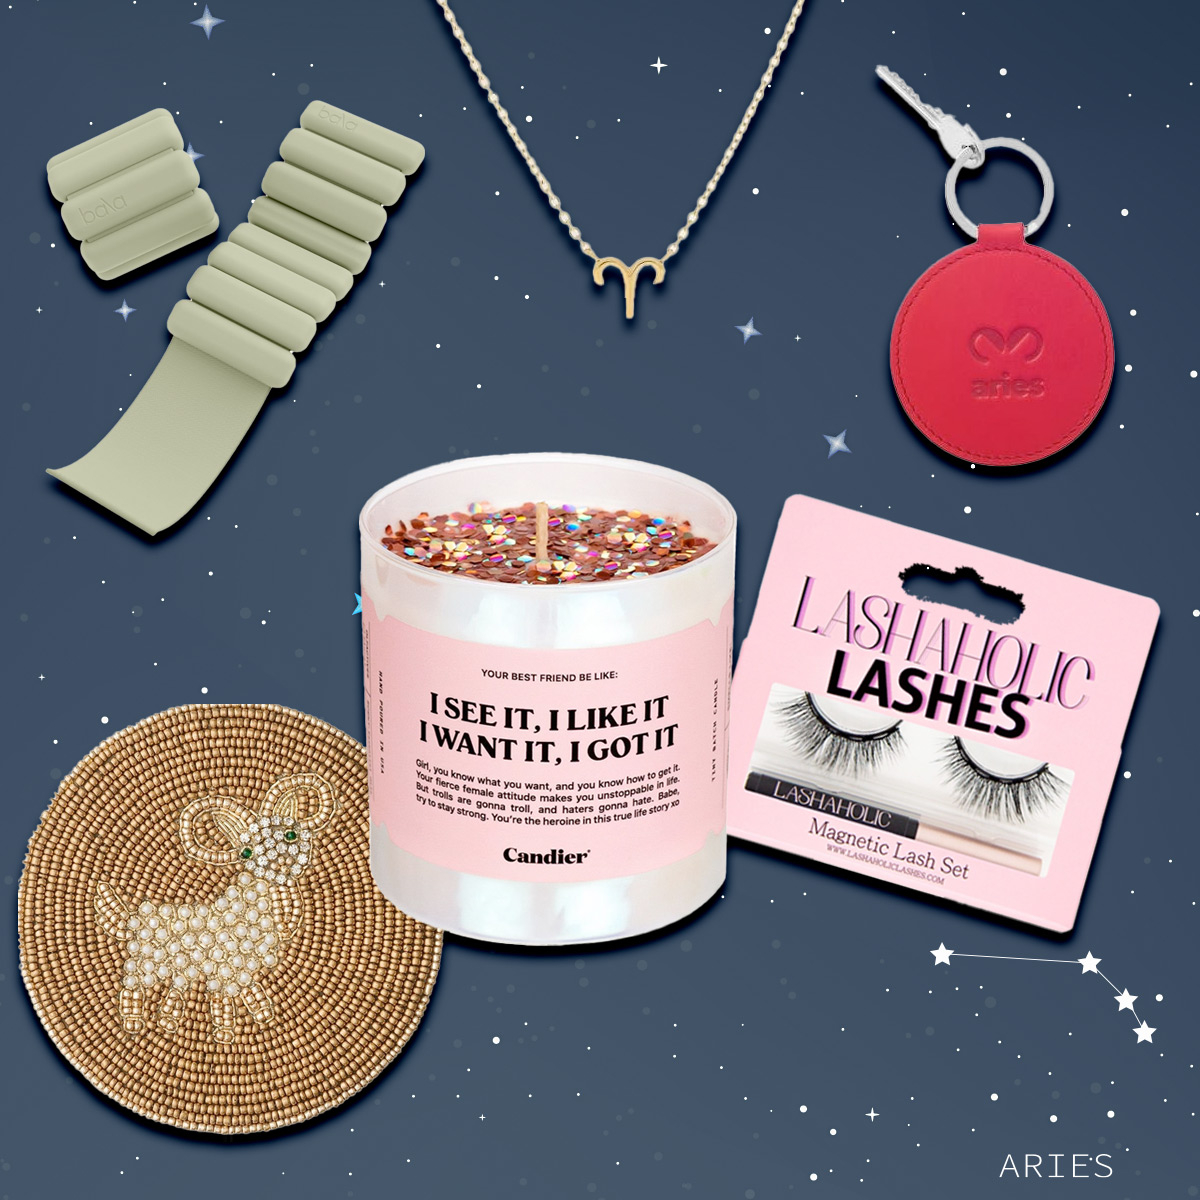 Aries Shoppable Horoscope: 10 Birthday Gifts Aries Will Love Even More Than Impulsive Decision-Making